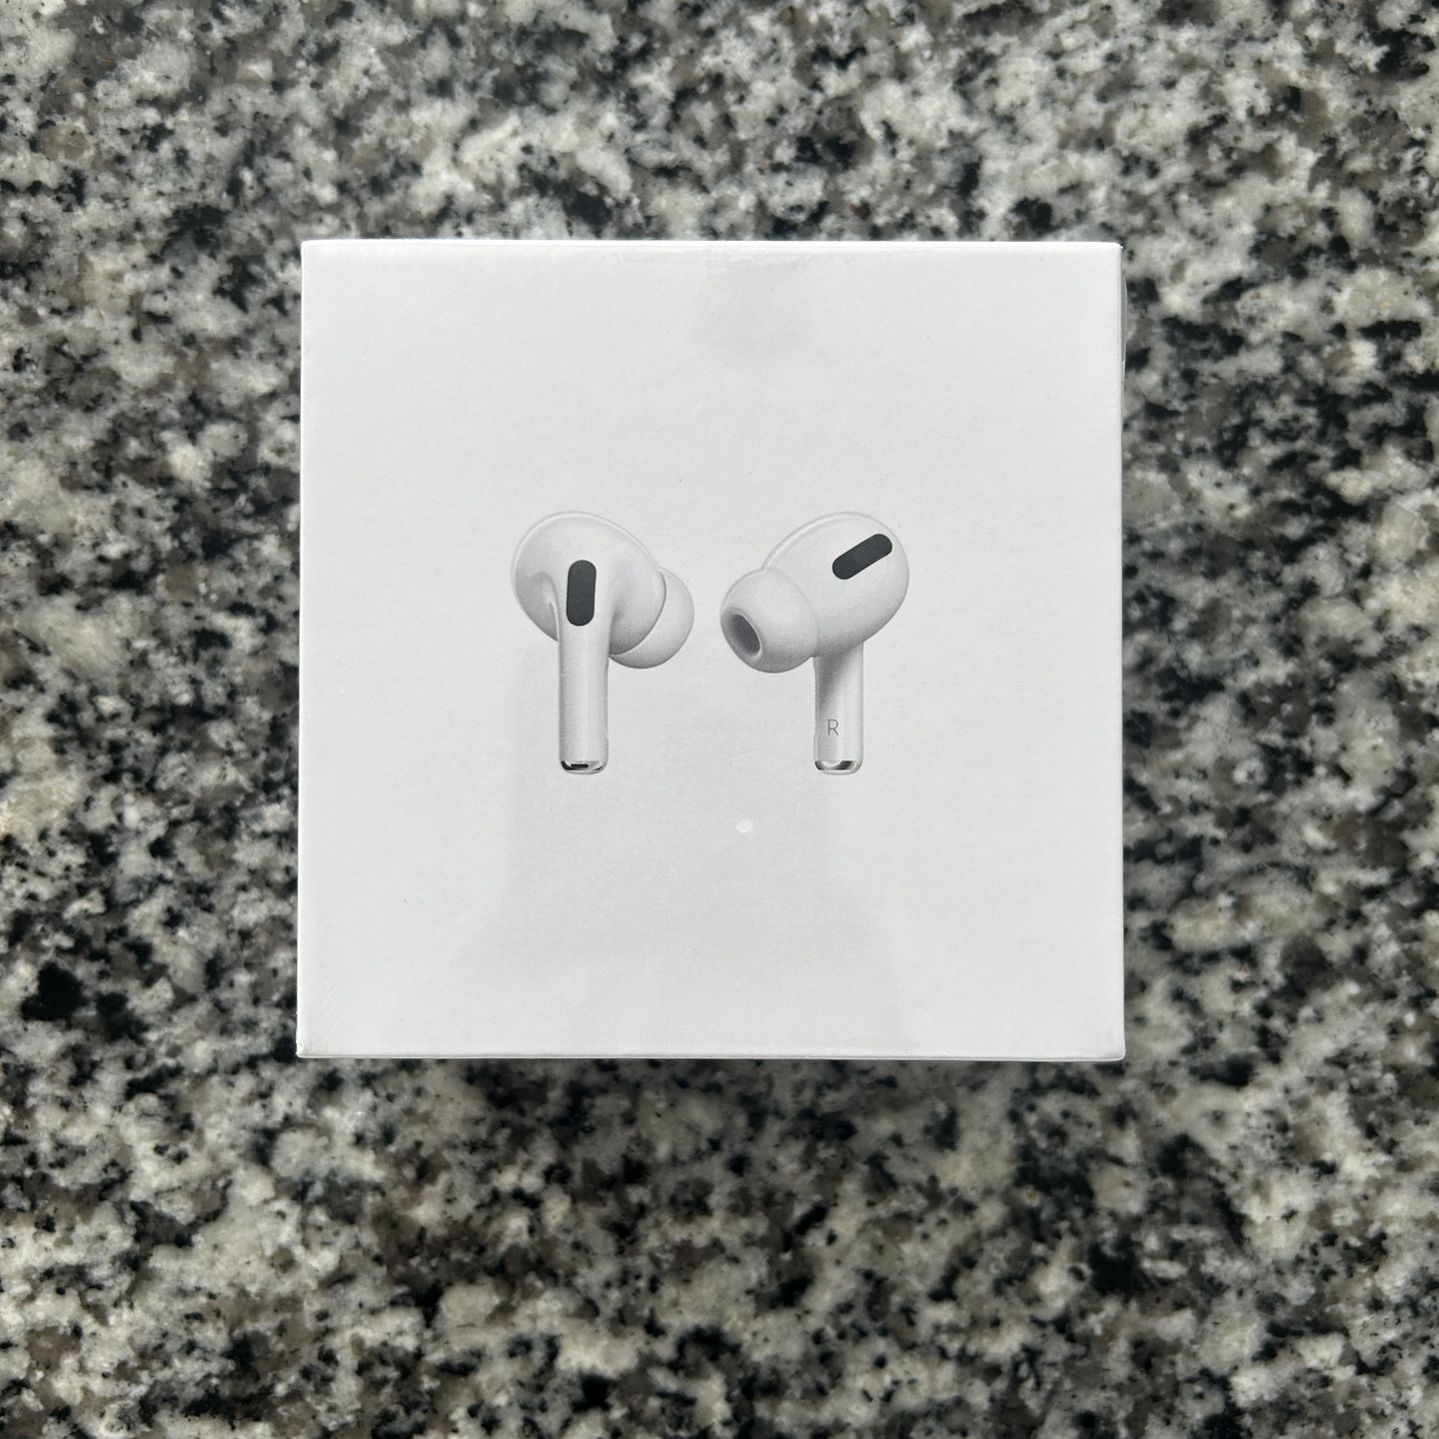 Apple Airpods Pro *Never Opened*